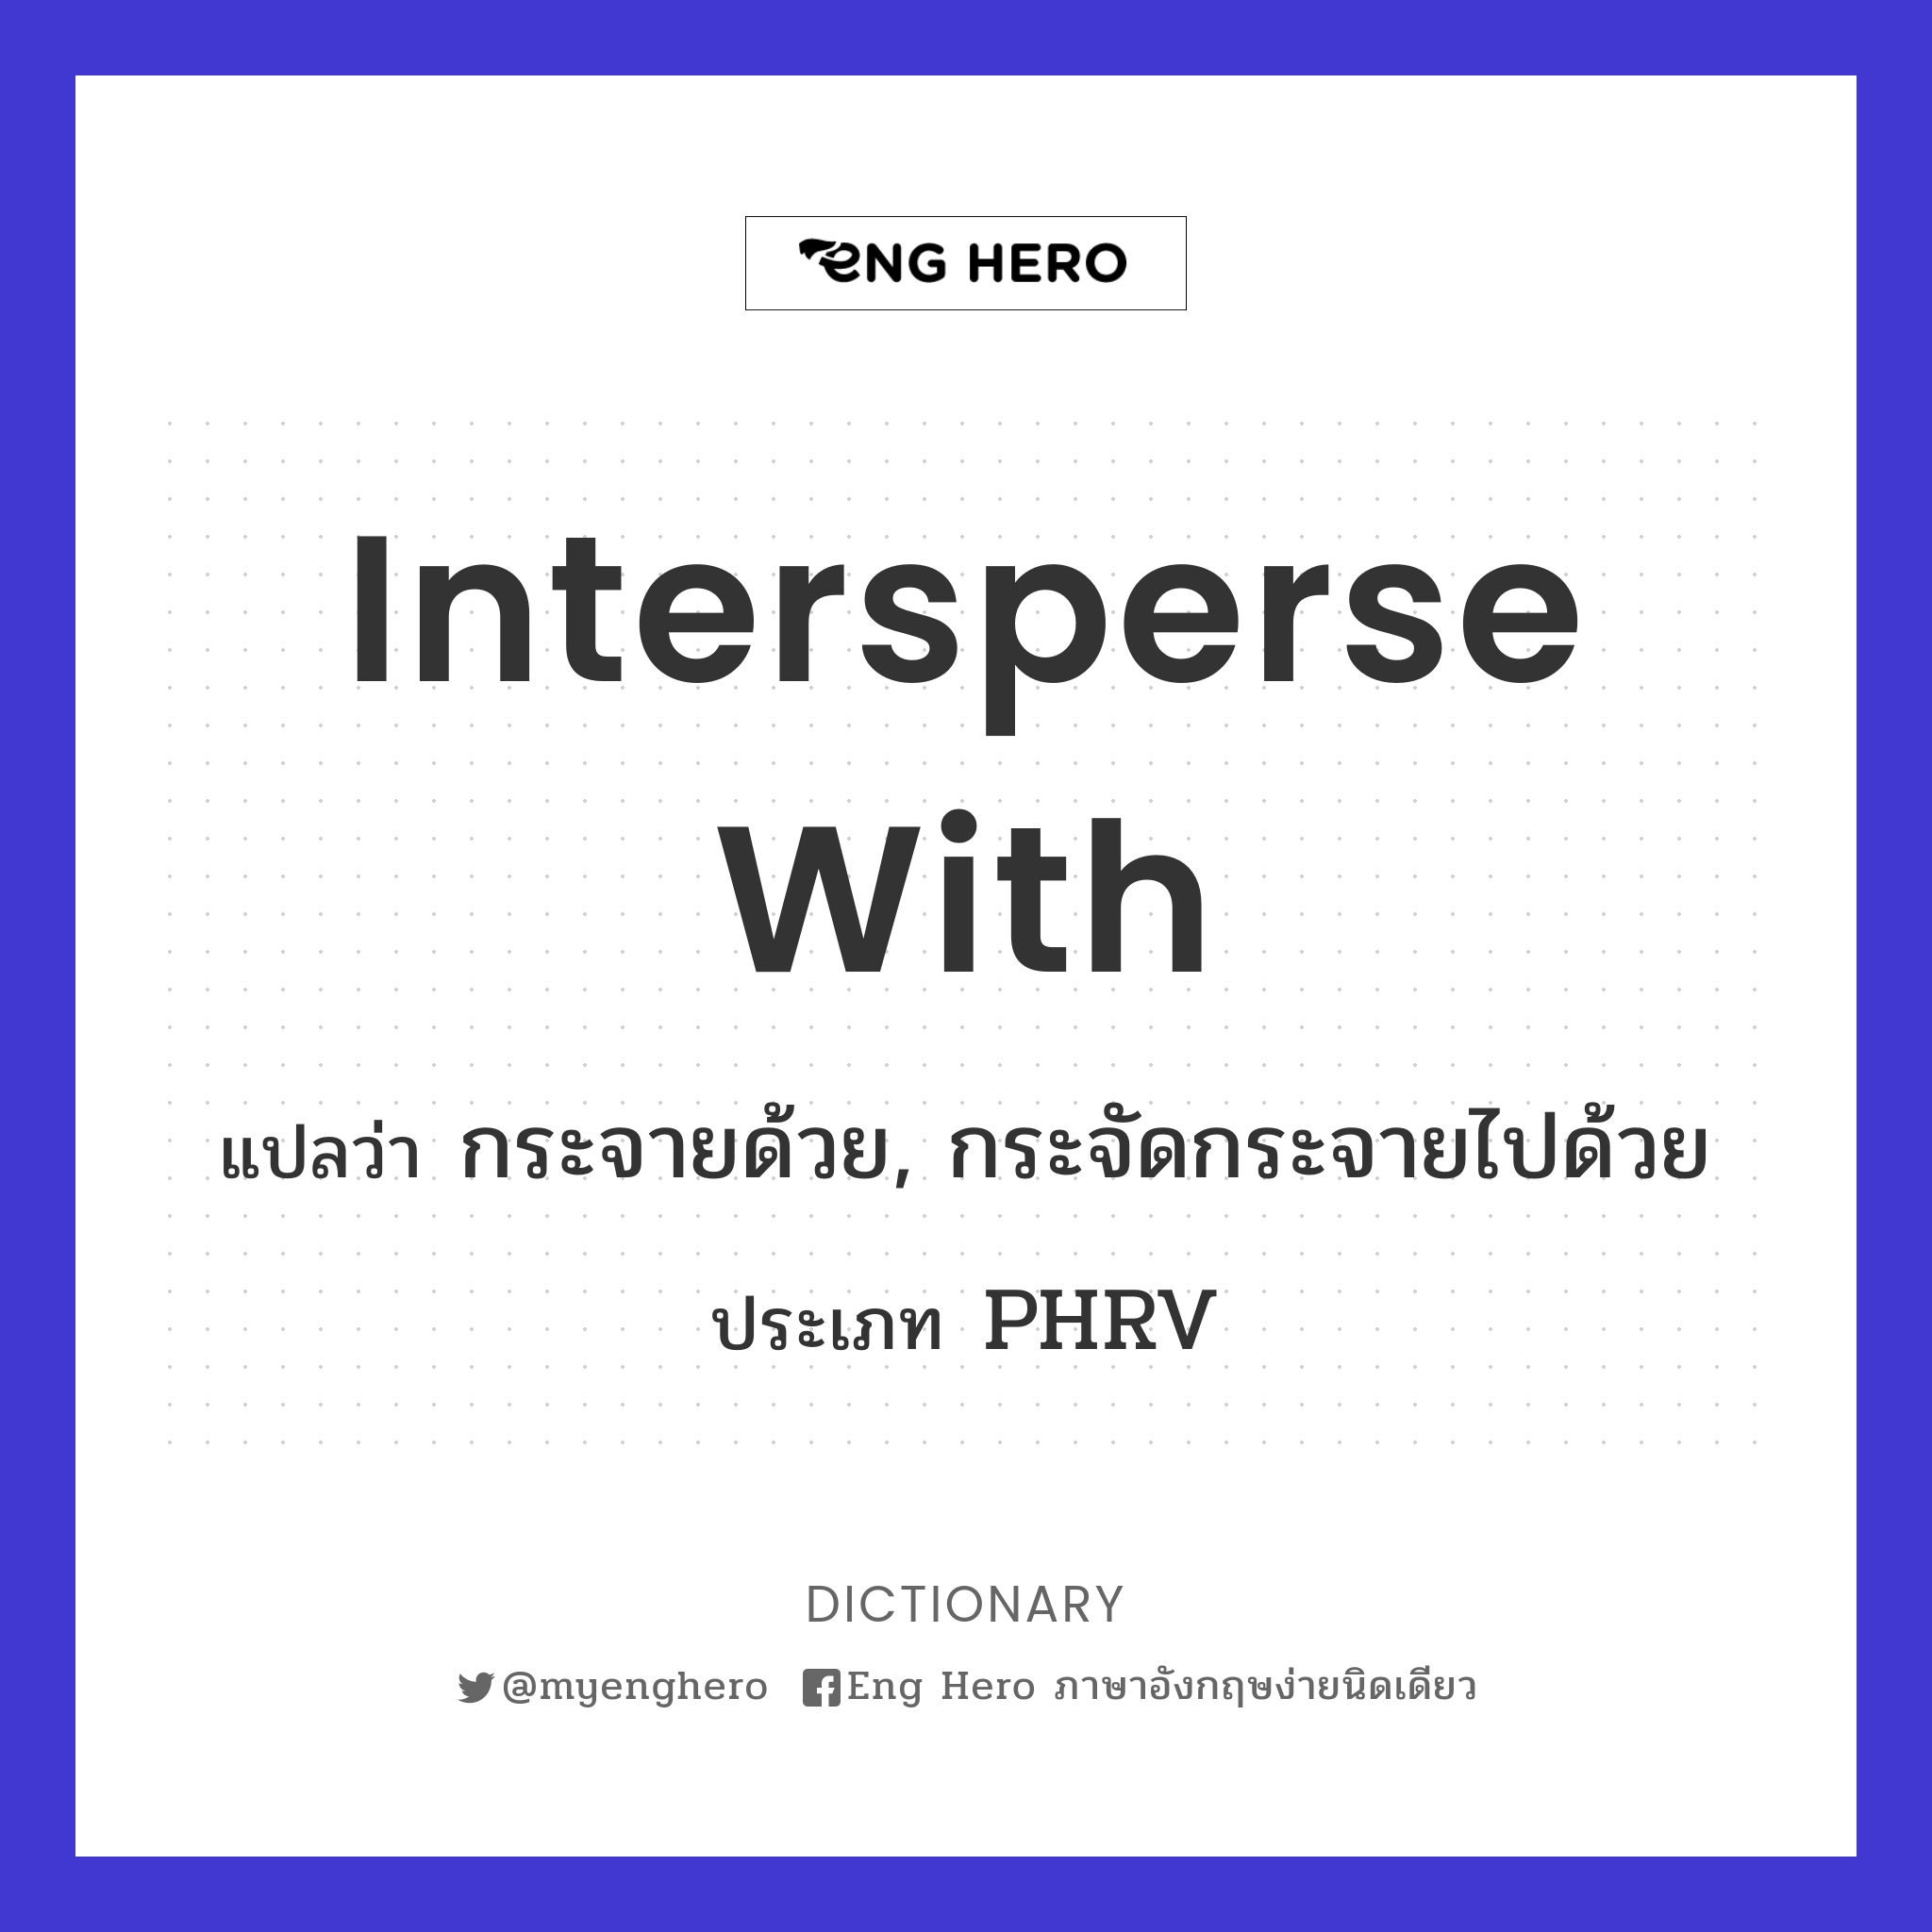 intersperse with